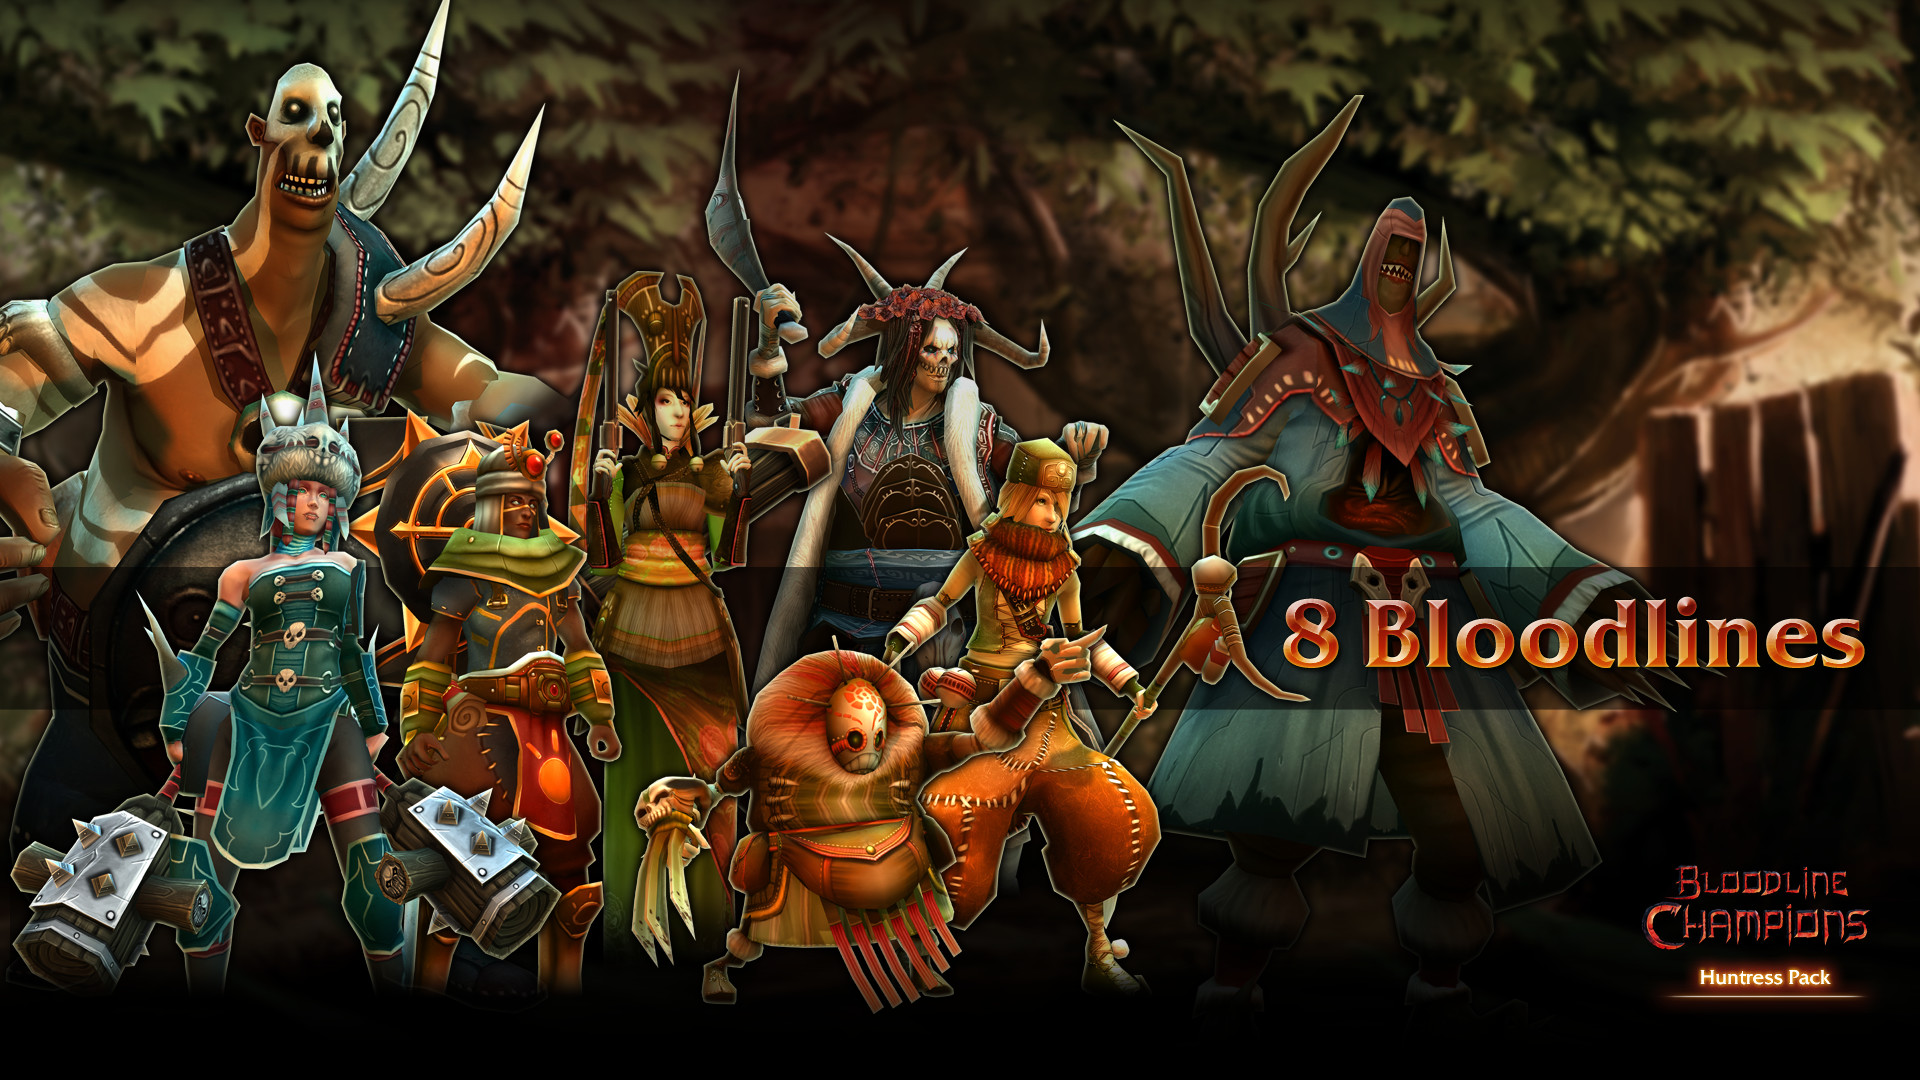 Bloodline Champions - Huntress Pack on Steam